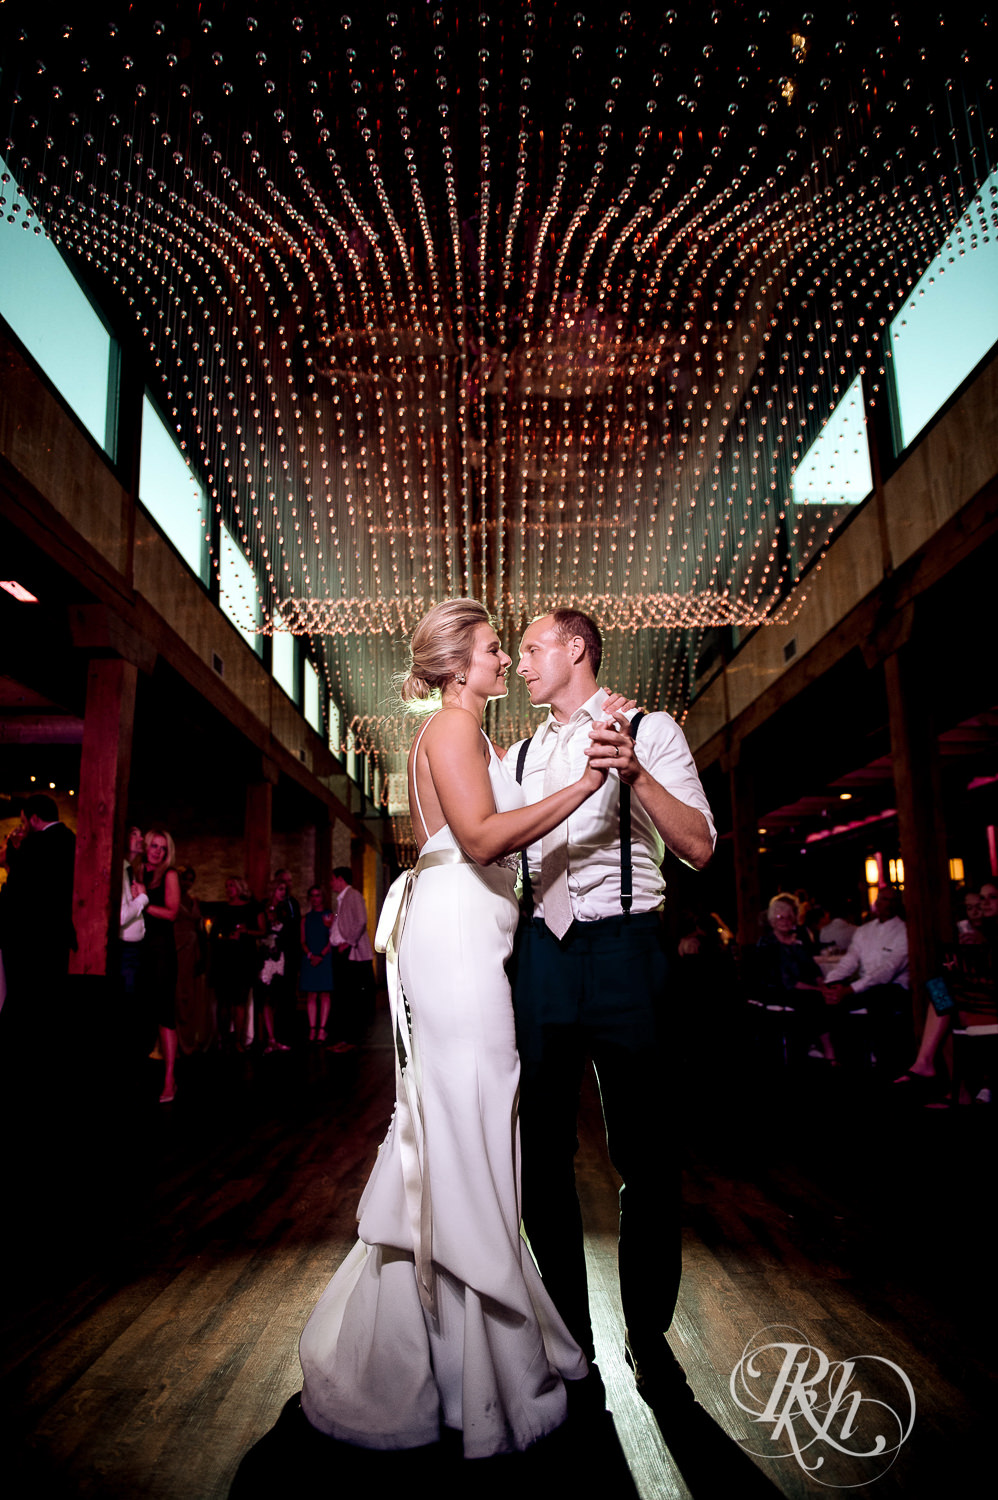 Bride and groom dance during wedding reception at Minneapolis Event Centers in Minneapolis, Minnesota.